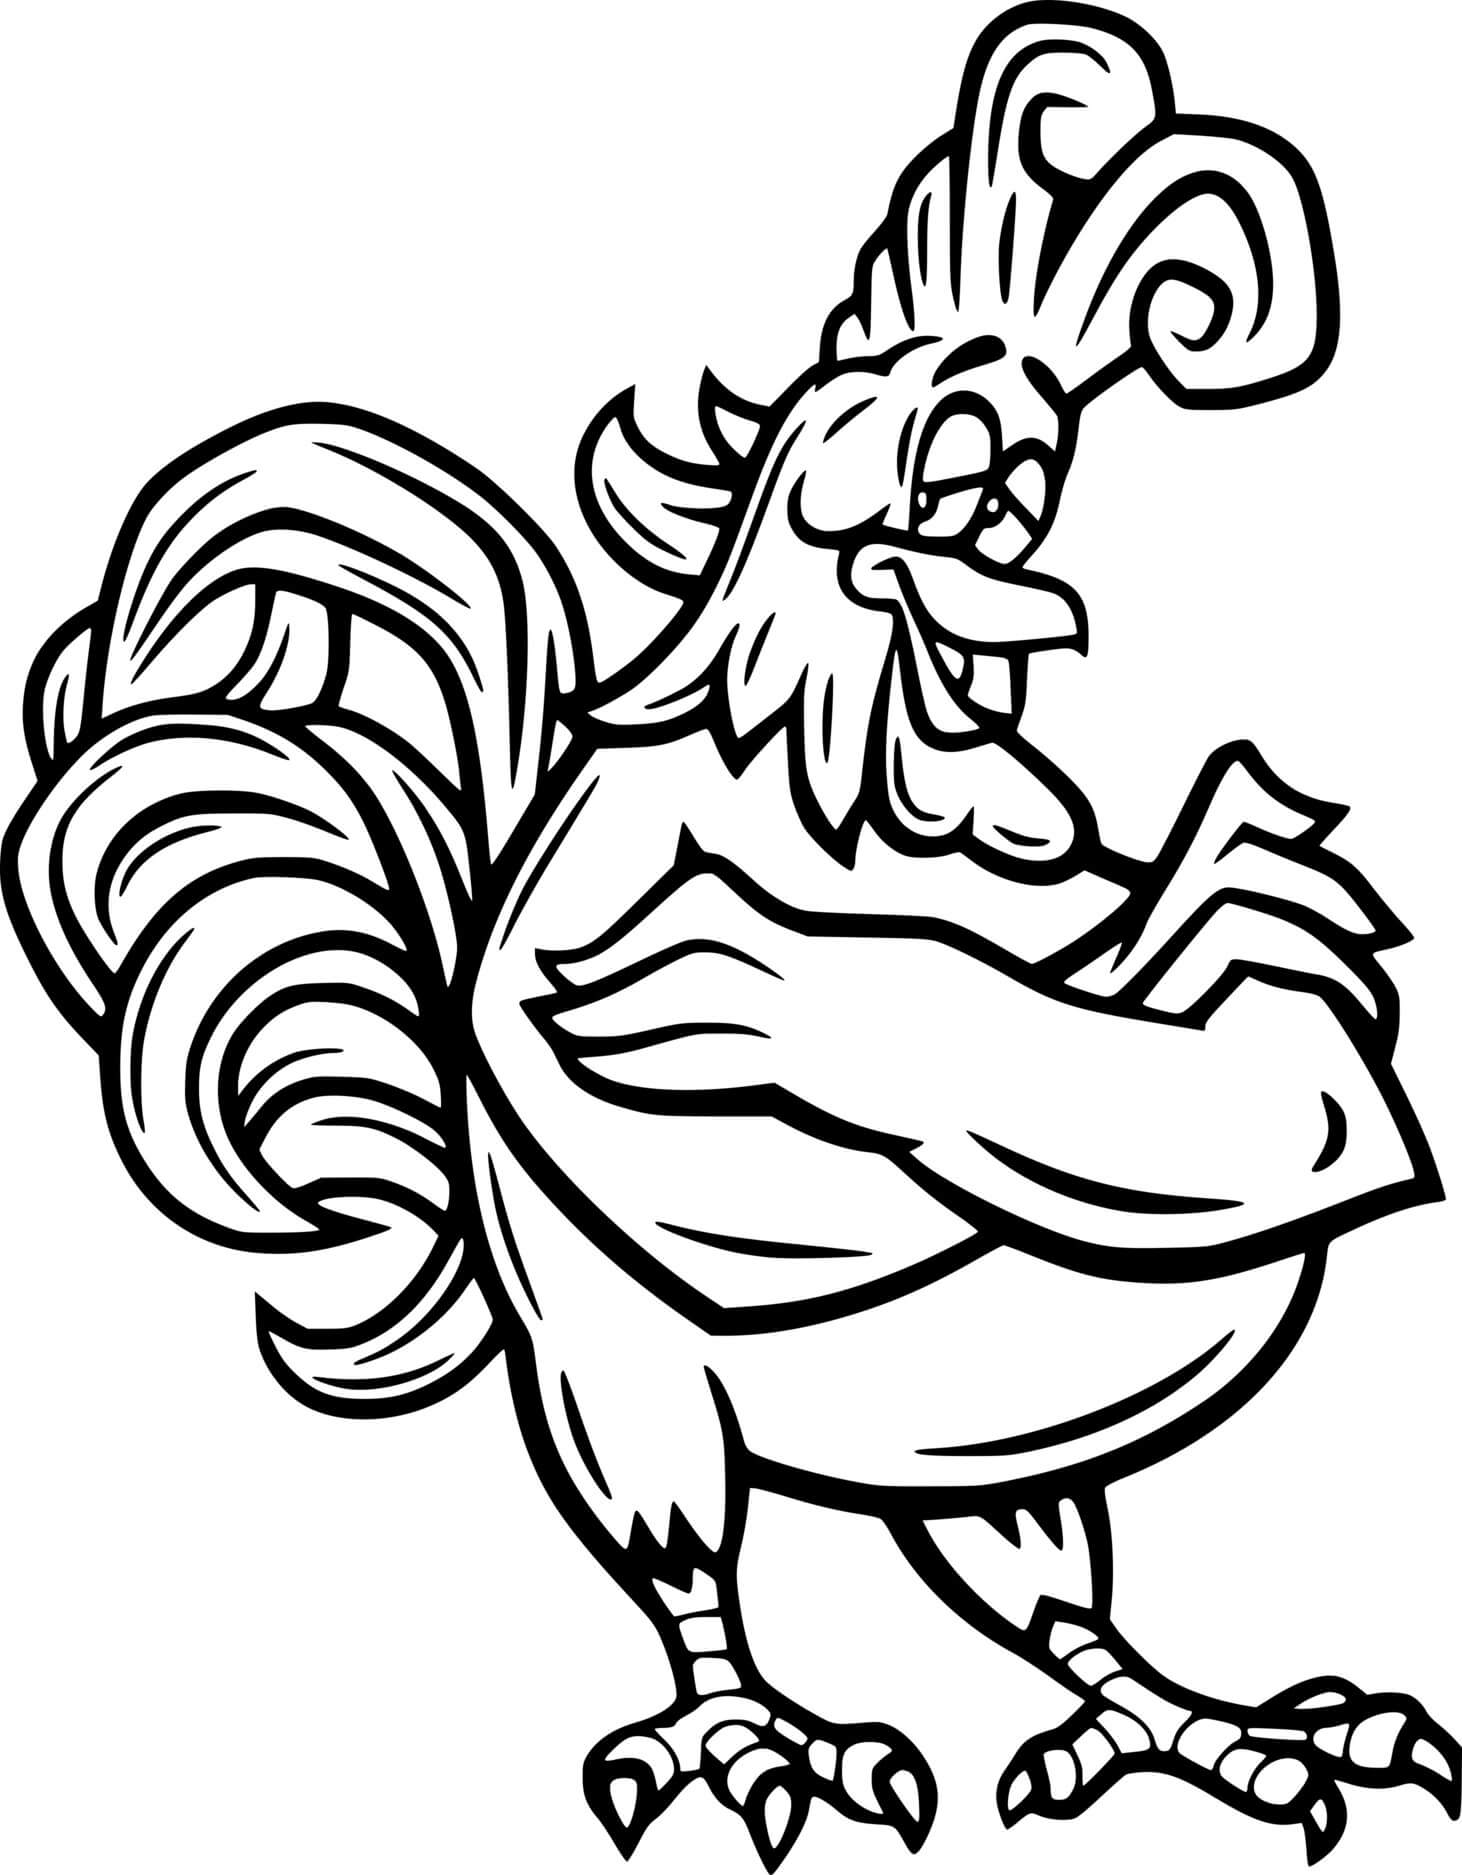 Rooster Crosses Arms Over His Chest Coloring Page